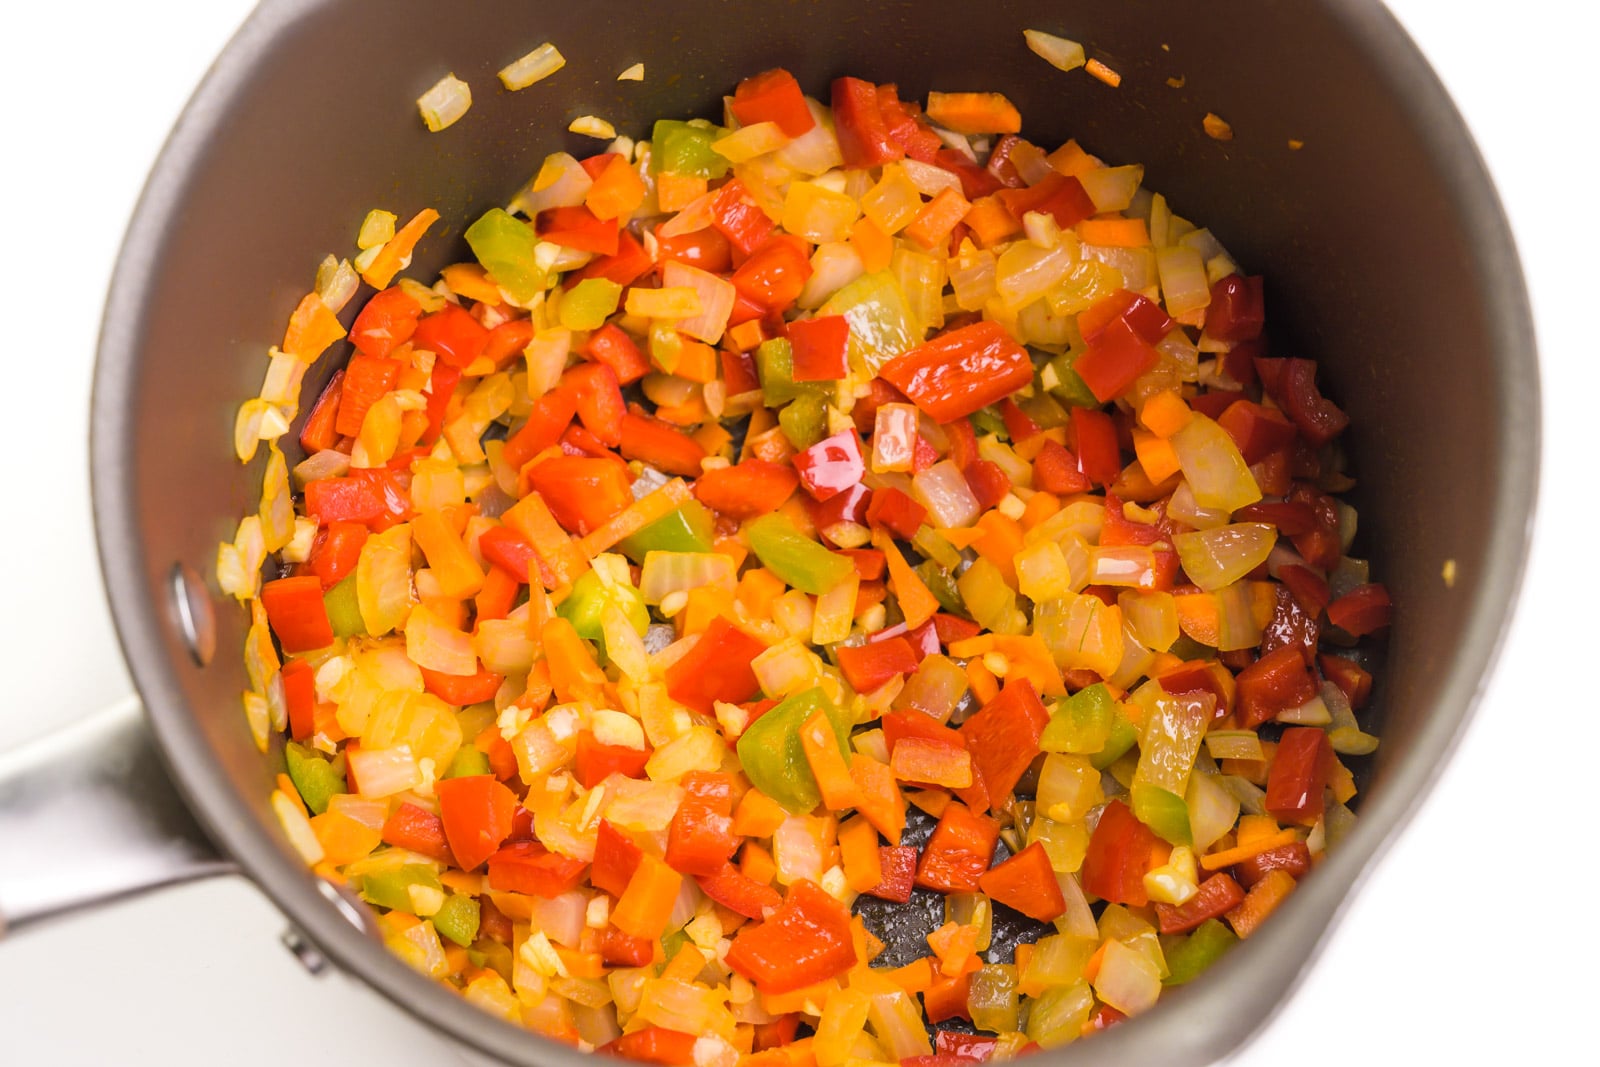 Looking into a saucepan with chopped veggies, such as onions and red bell peppers, being cooked until tender.